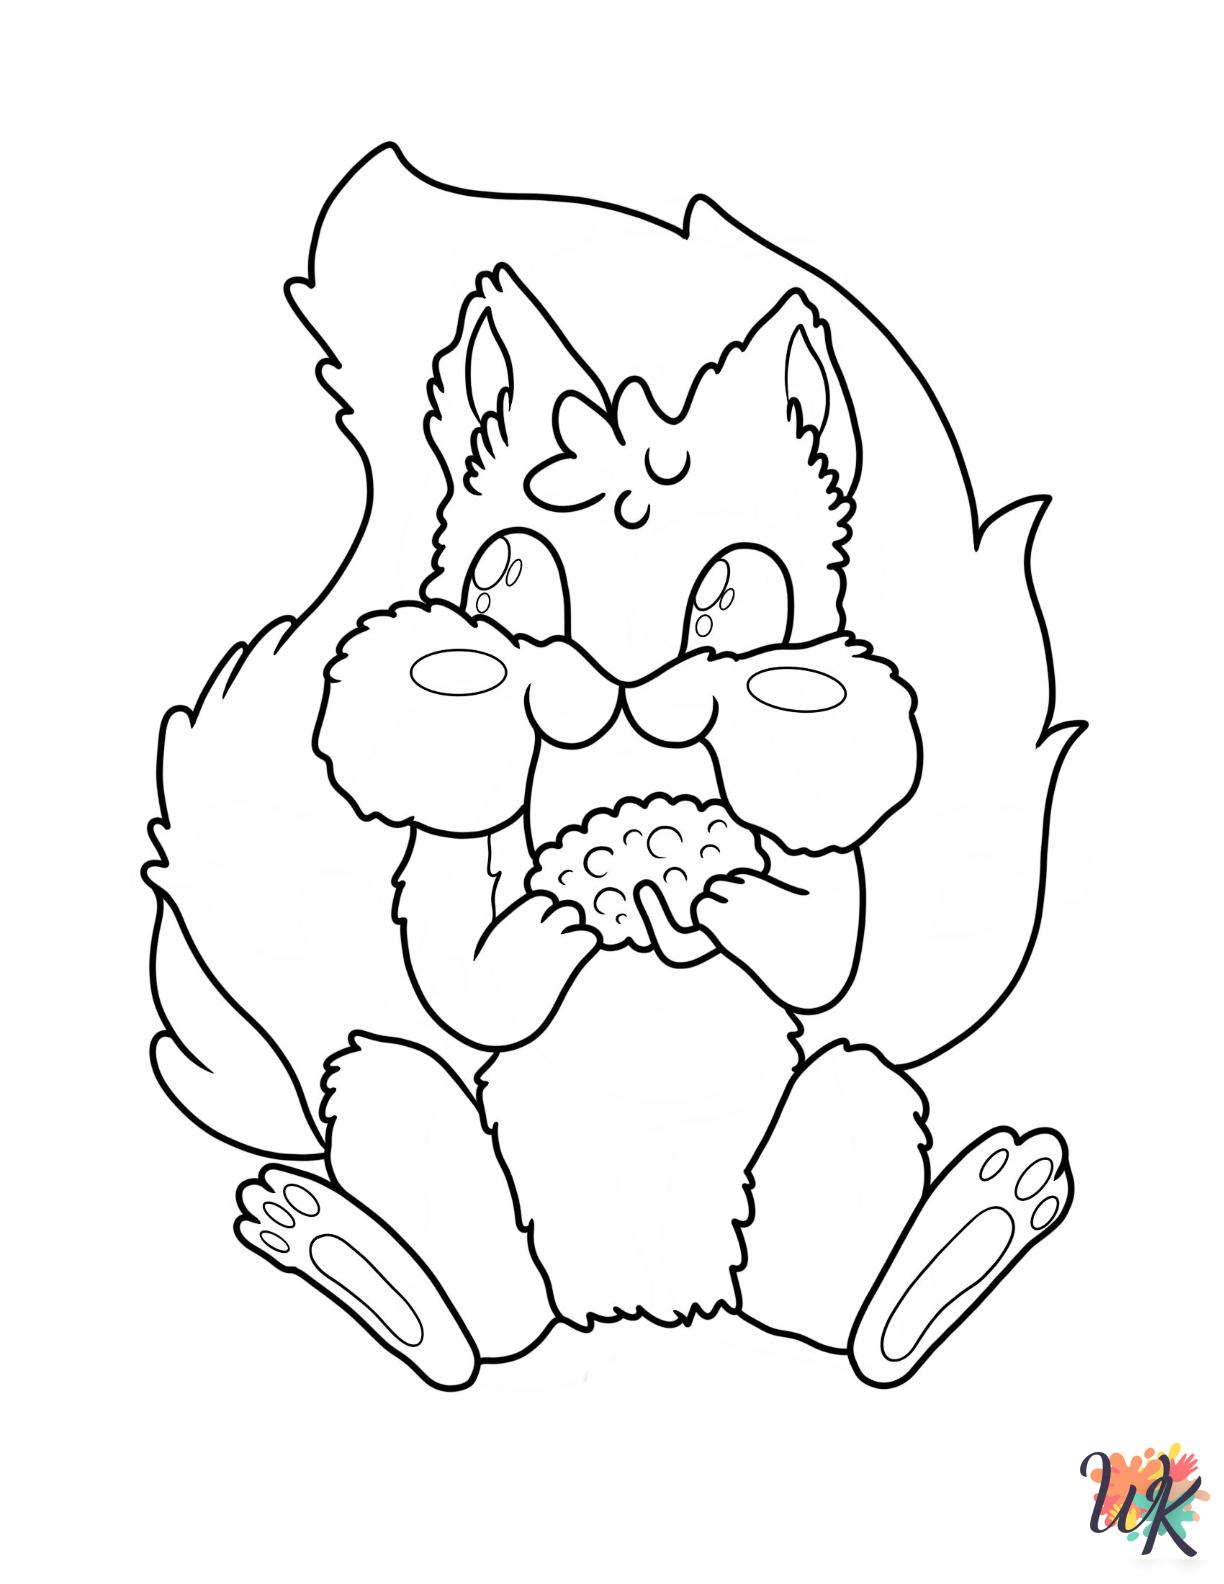 Squirrel coloring pages for kids